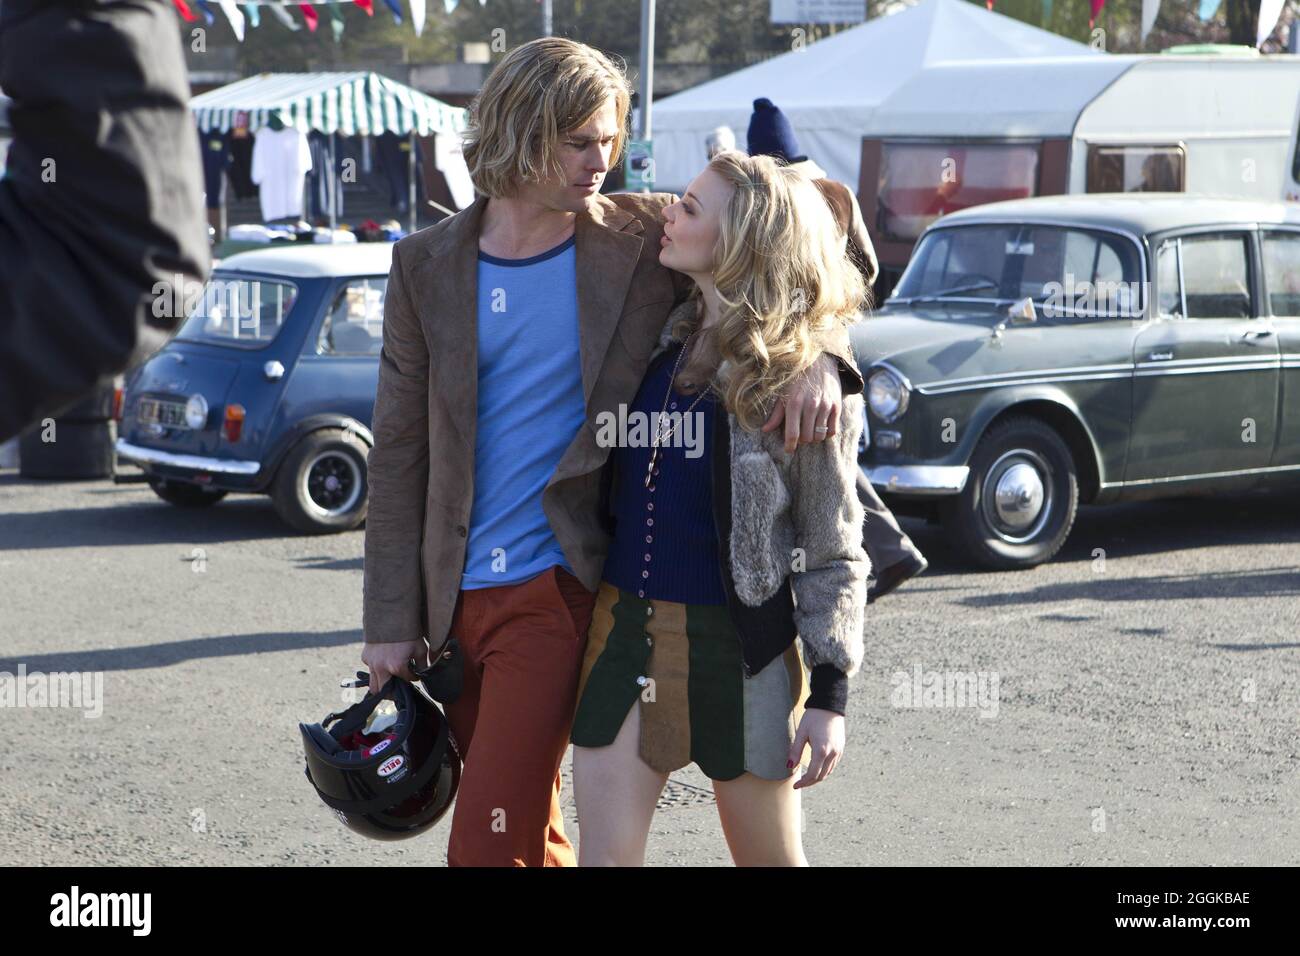 Los Angeles. CA. USA. Chris Hemsworth and Natalie Dormer in the ©Universal Pictures new film: Rush (2013). Plot: A biography of Formula 1 champion driver Niki Lauda and the 1976 crash that almost claimed his life. Mere weeks after the accident, he got behind the wheel to challenge his rival, James Hunt. Captioned 16th August 2013. Ref:LMK106-45159-050913 Supplied by LMKMEDIA. Editorial Only. Landmark Media is not the copyright owner of these Film or TV stills but provides a service only for recognised Media outlets. pictures@lmkmedia.com Stock Photo